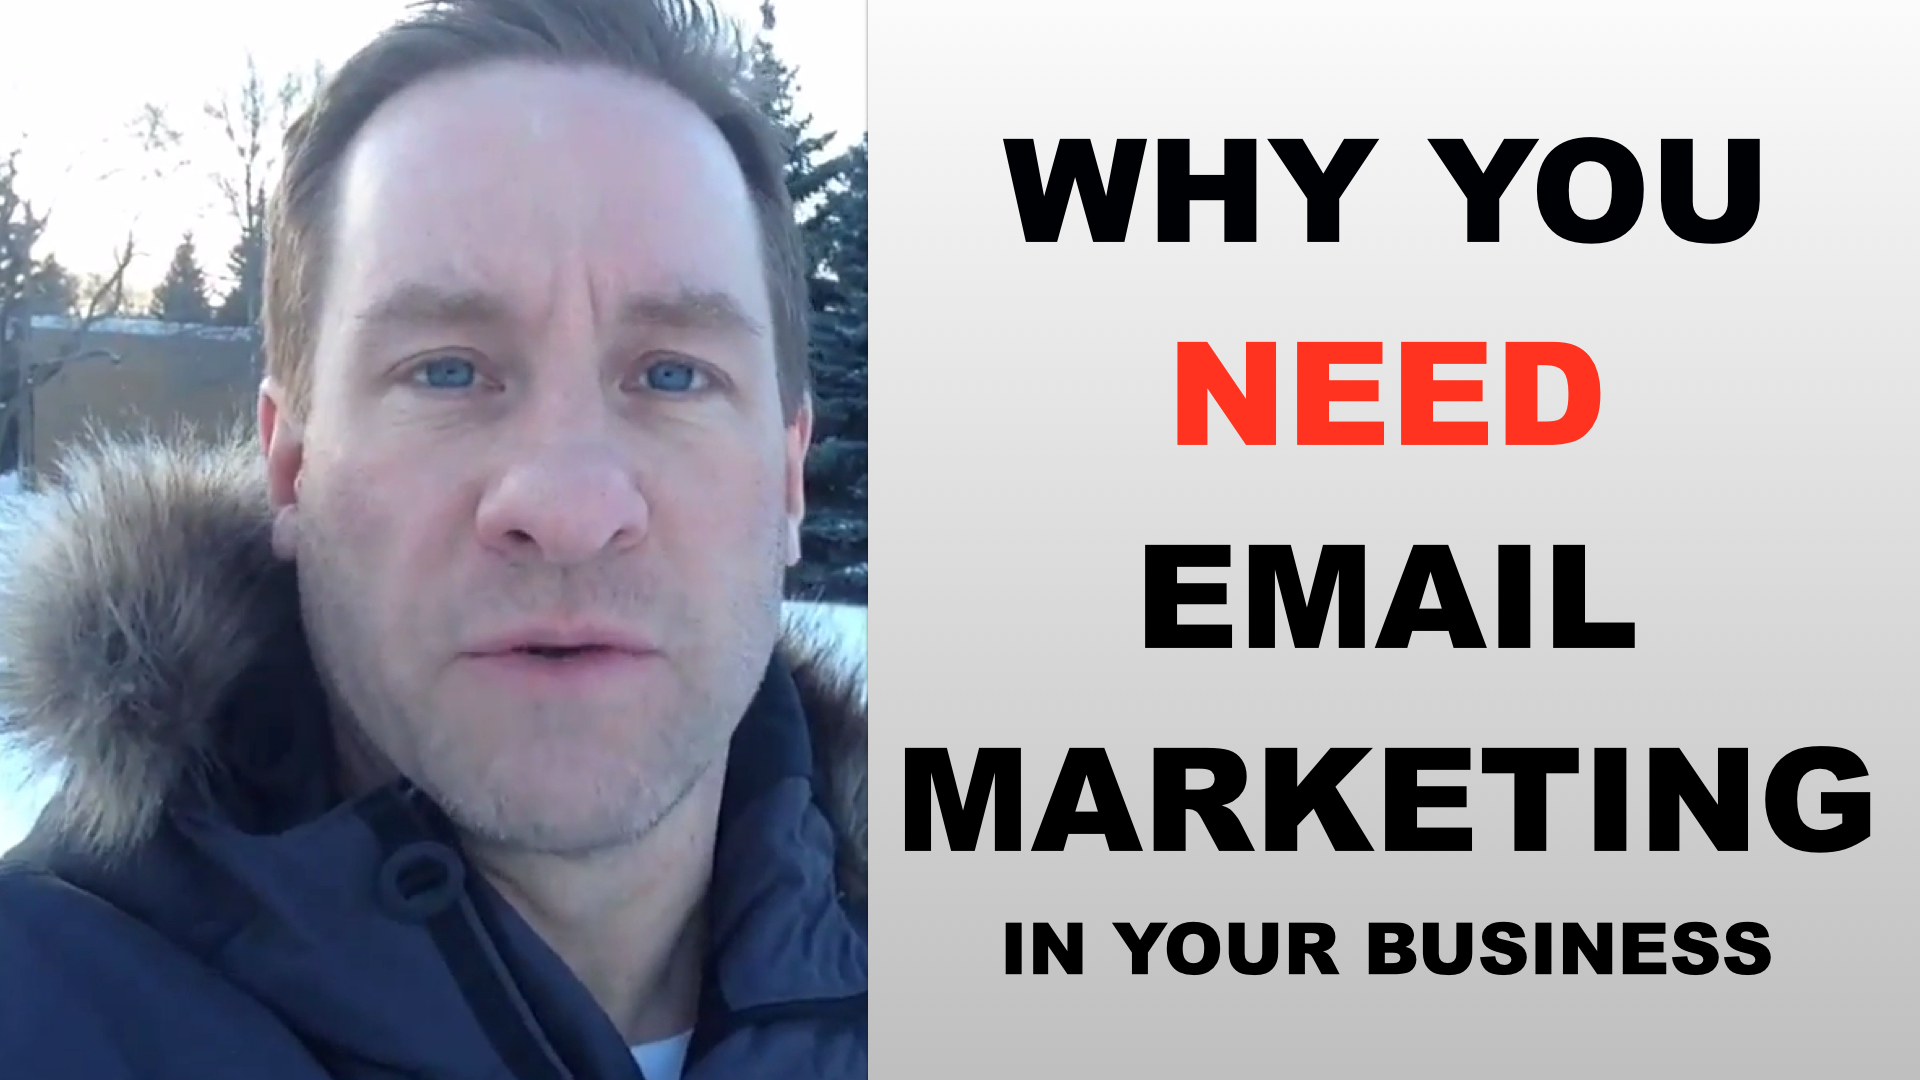 Email Marketing in your business